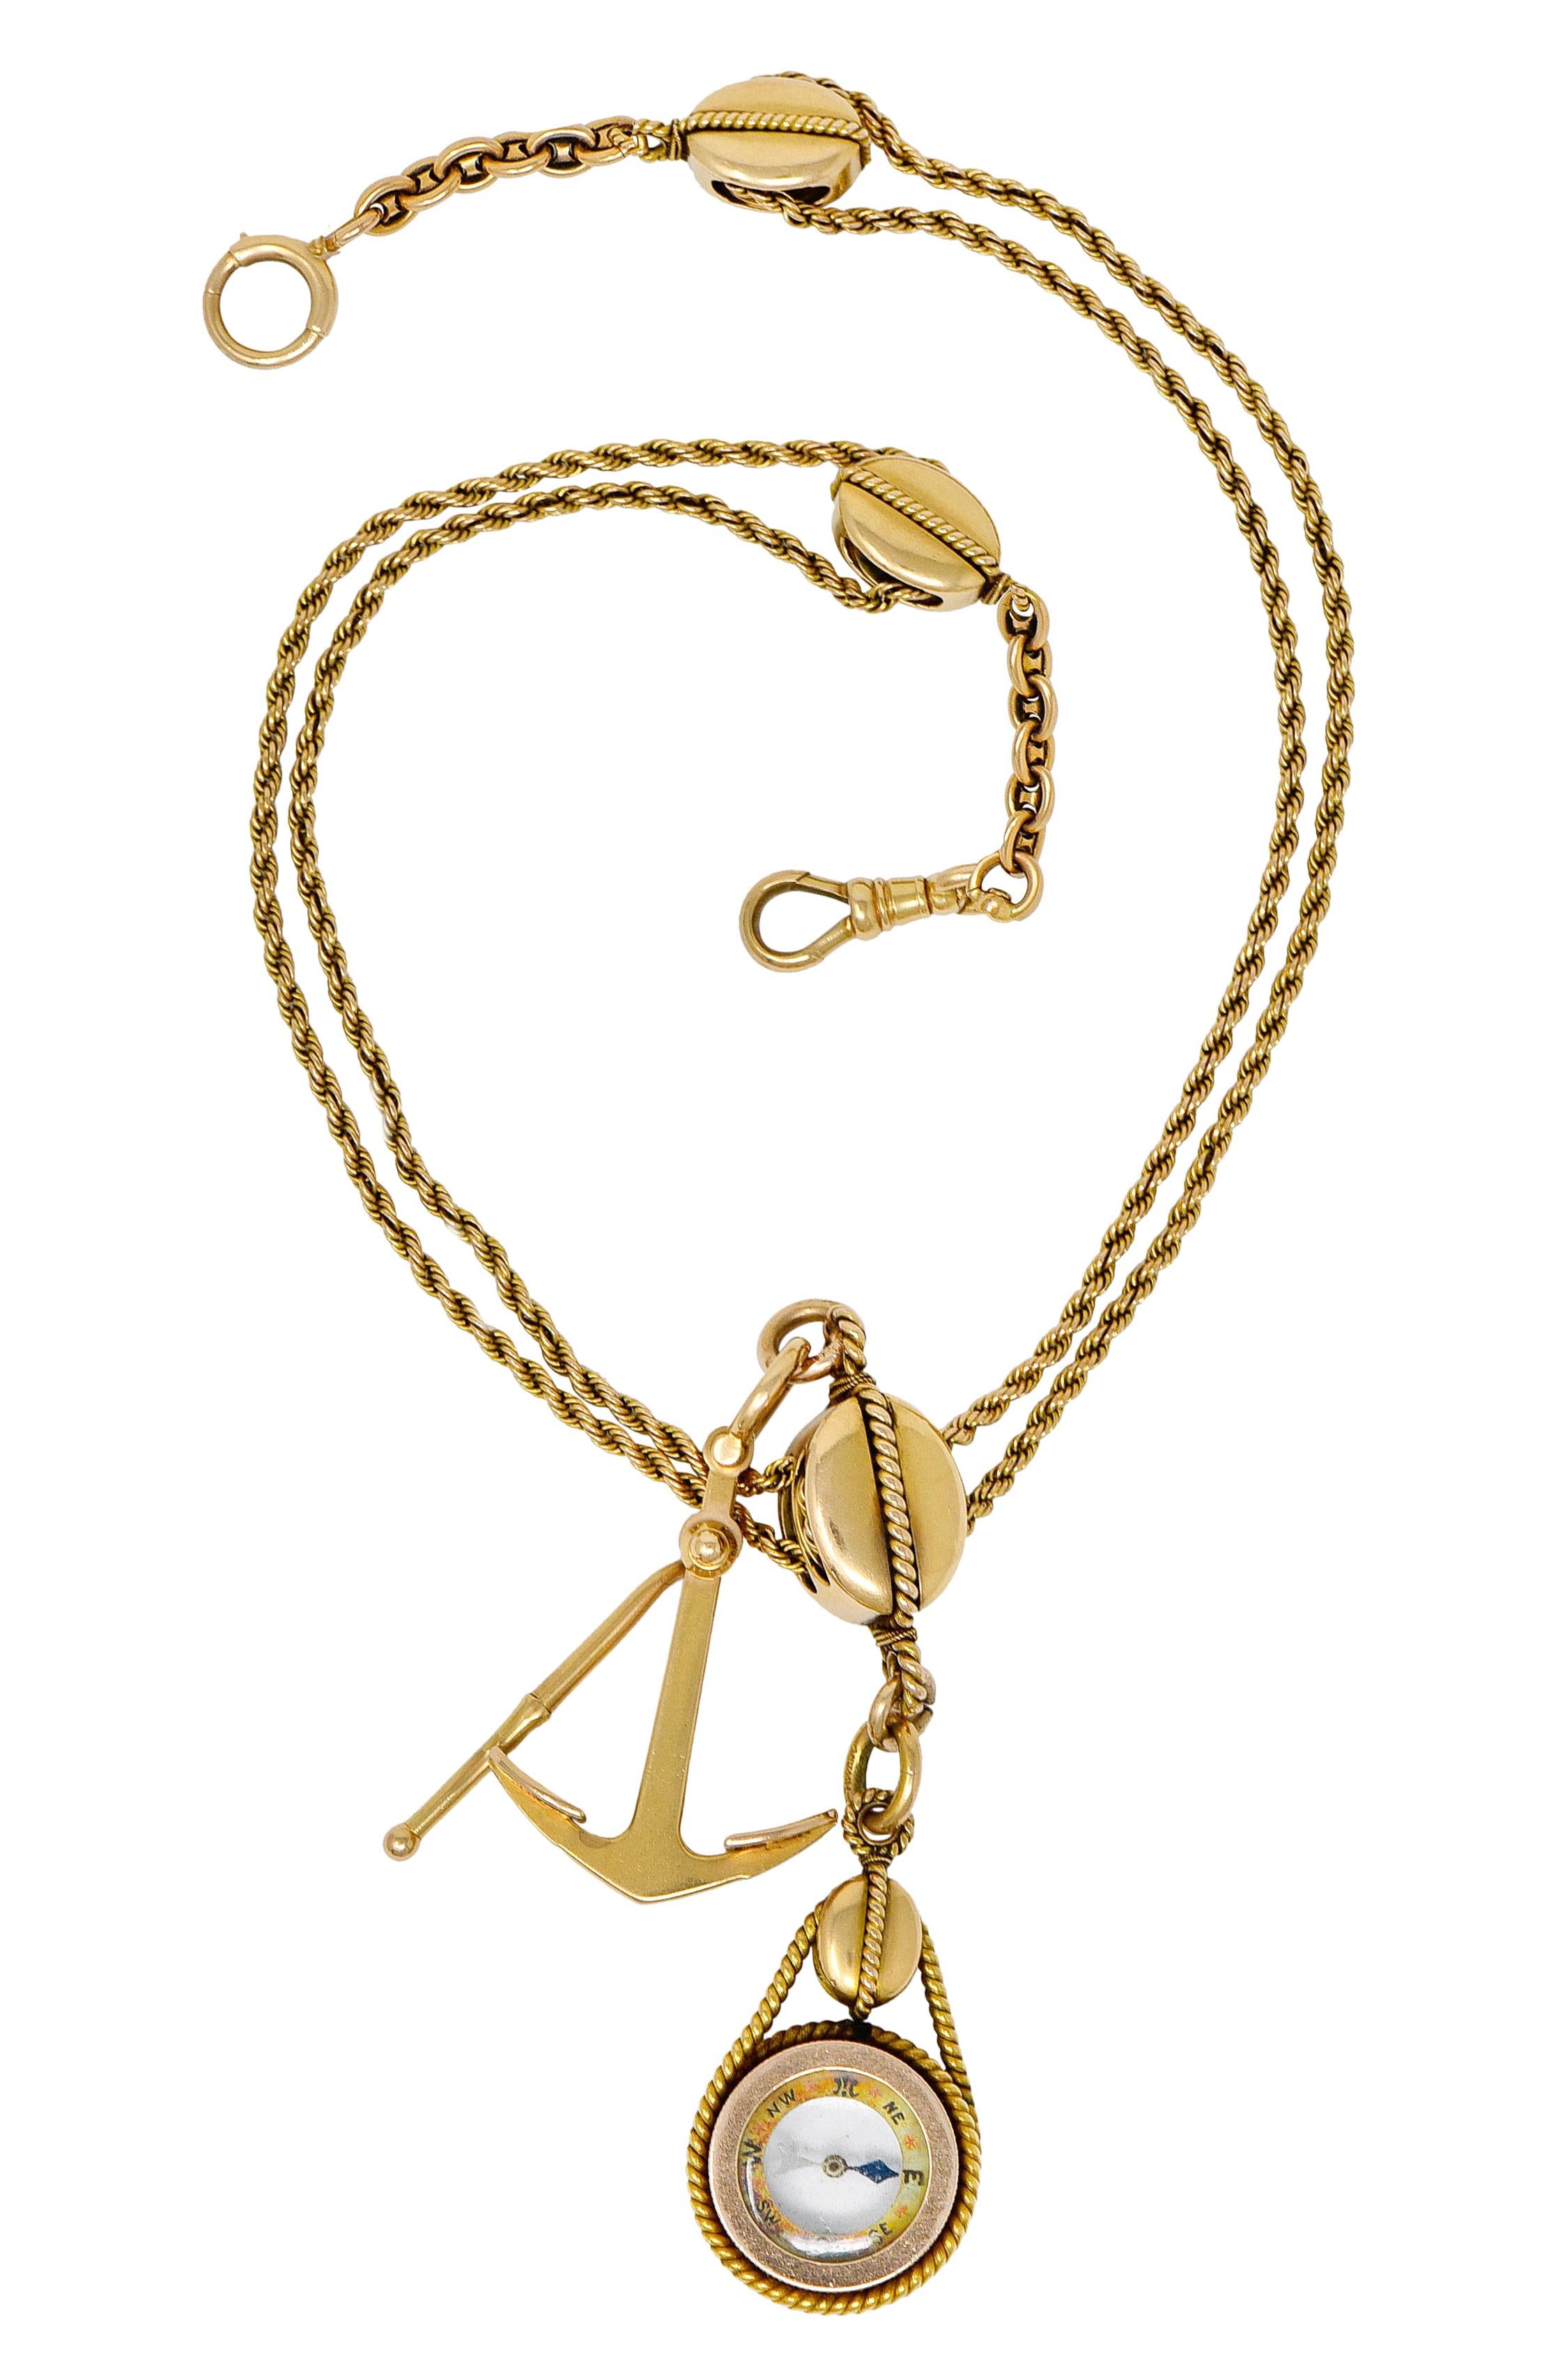 Designed with double strands of twisted rope chain threading through three functional pulley stations

Suspending a glass antique compass and a stylized polished gold anchor with a swinging pendulum; each charm is counterbalanced at each end of